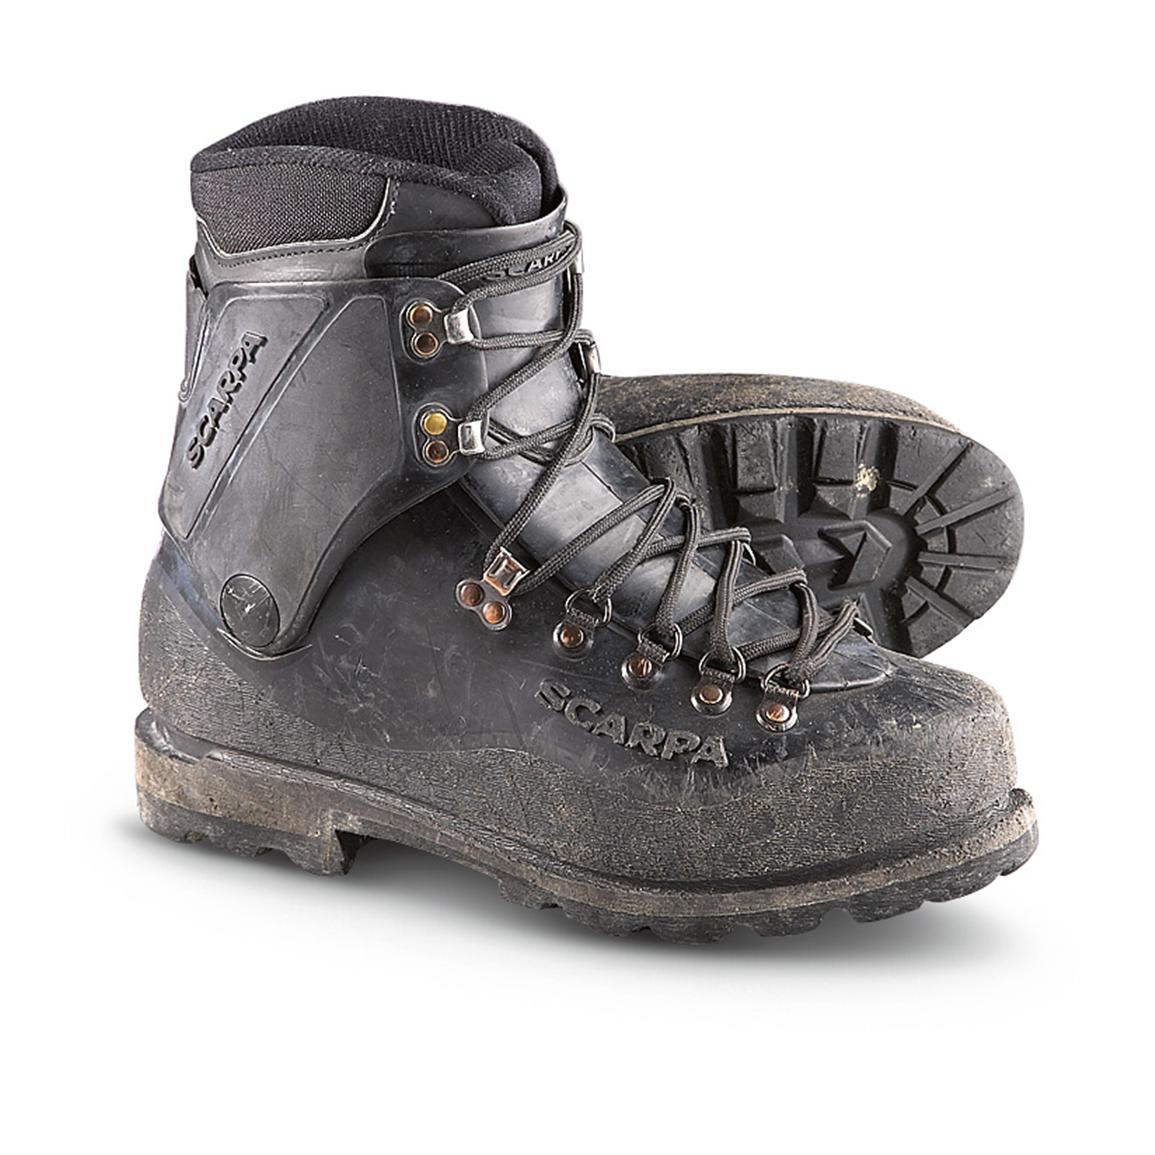 Used Men's French Military Mountain Boots, Black - 216762, Combat ...